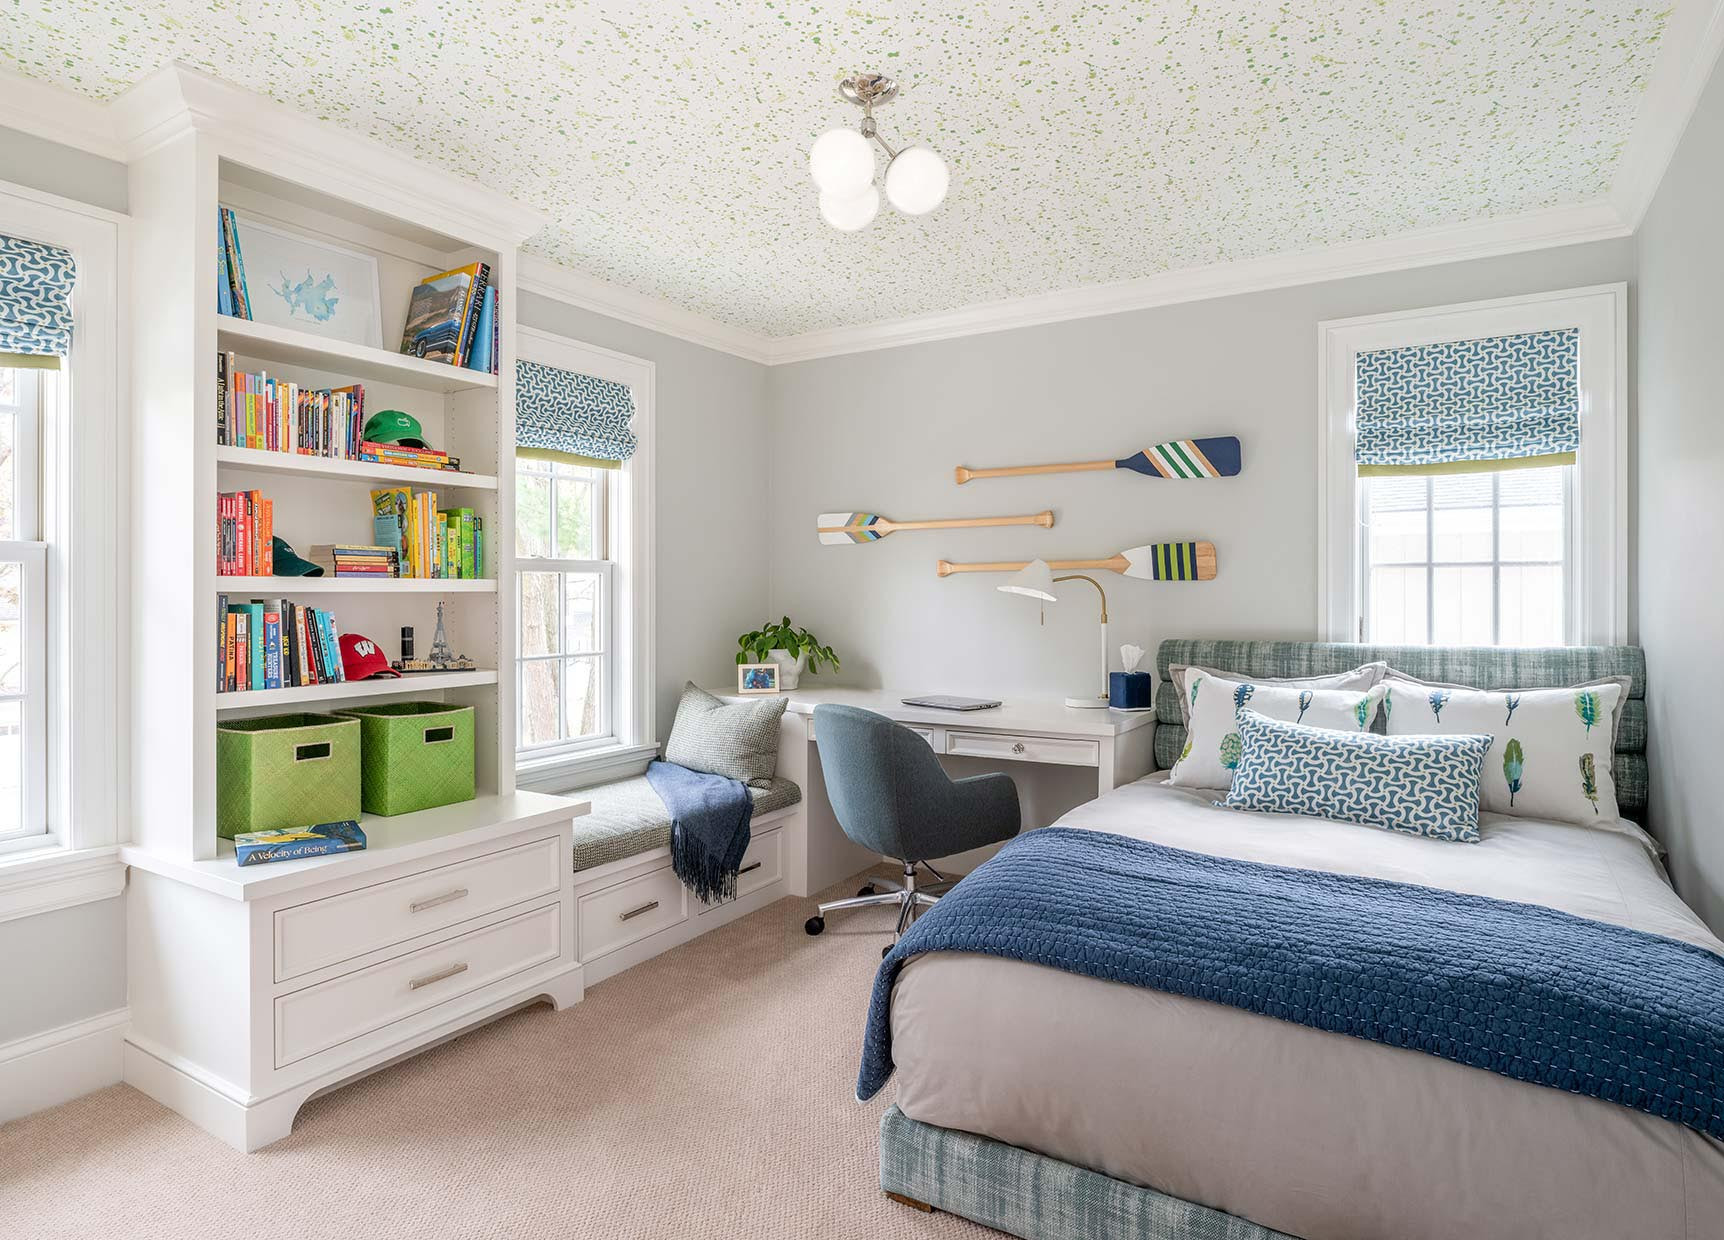 15 Timeless Kids' Room Ideas that Embrace Classic Design